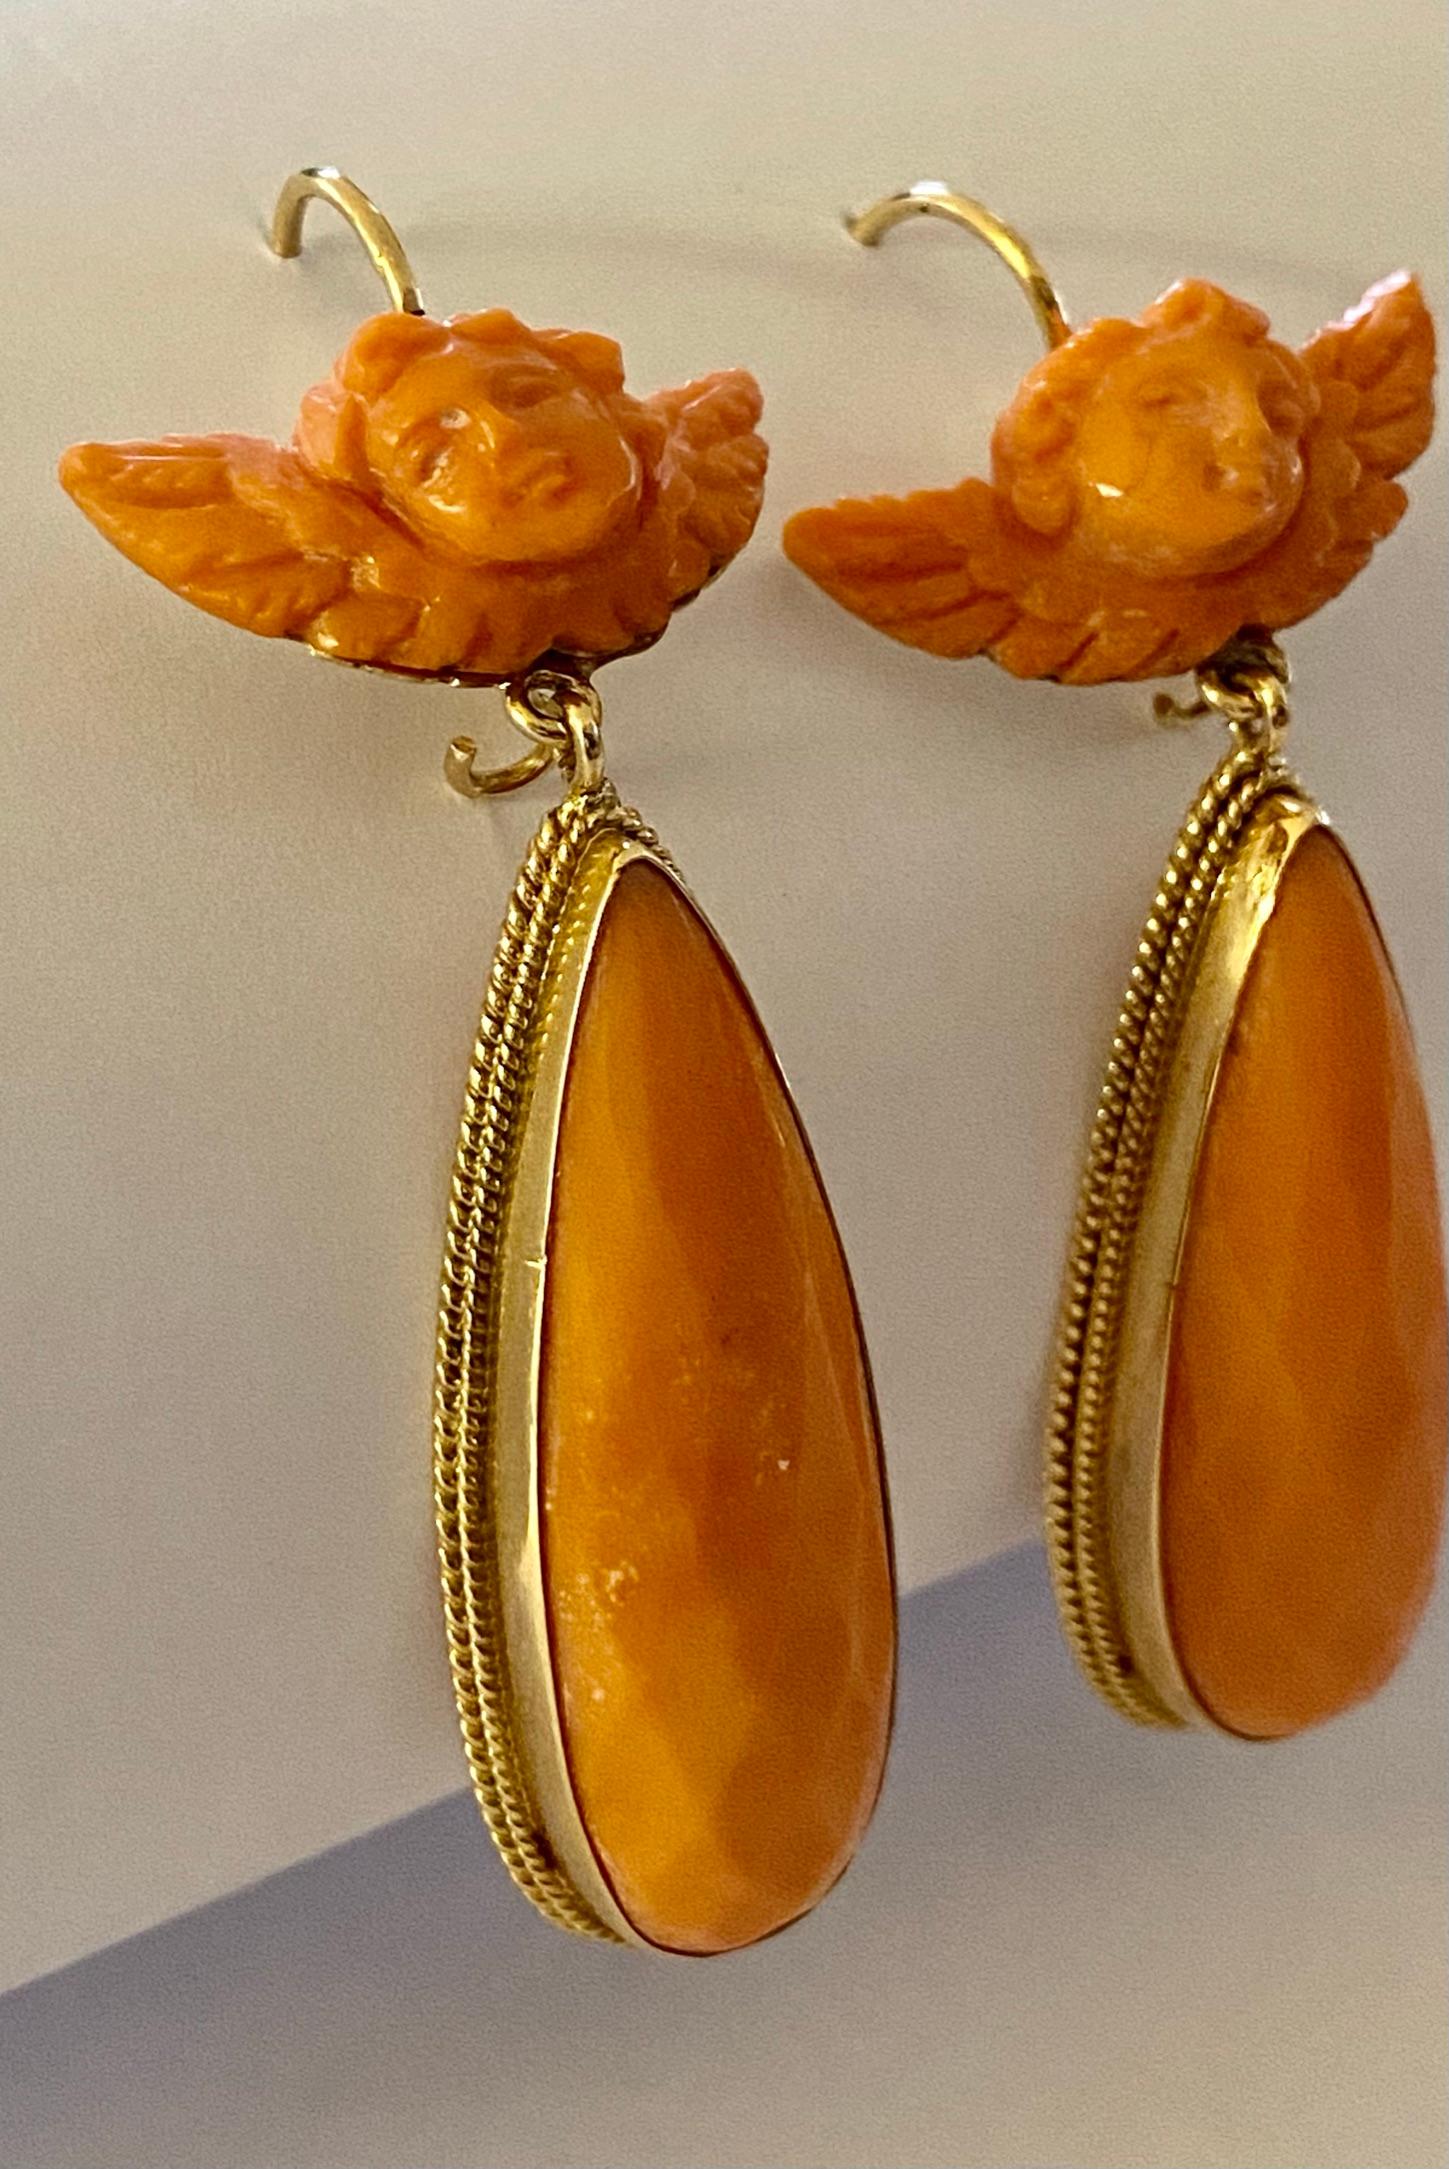 - 585/- gold earrings.
- red coral; 2x angel head,
   billed level.
- Total weight (both) = 15.39 grams
- Natural coral (untreated)
- Italy ca 1965
- Maker's mark: 499NA = Cuocolo
   Vicenza from Naples.